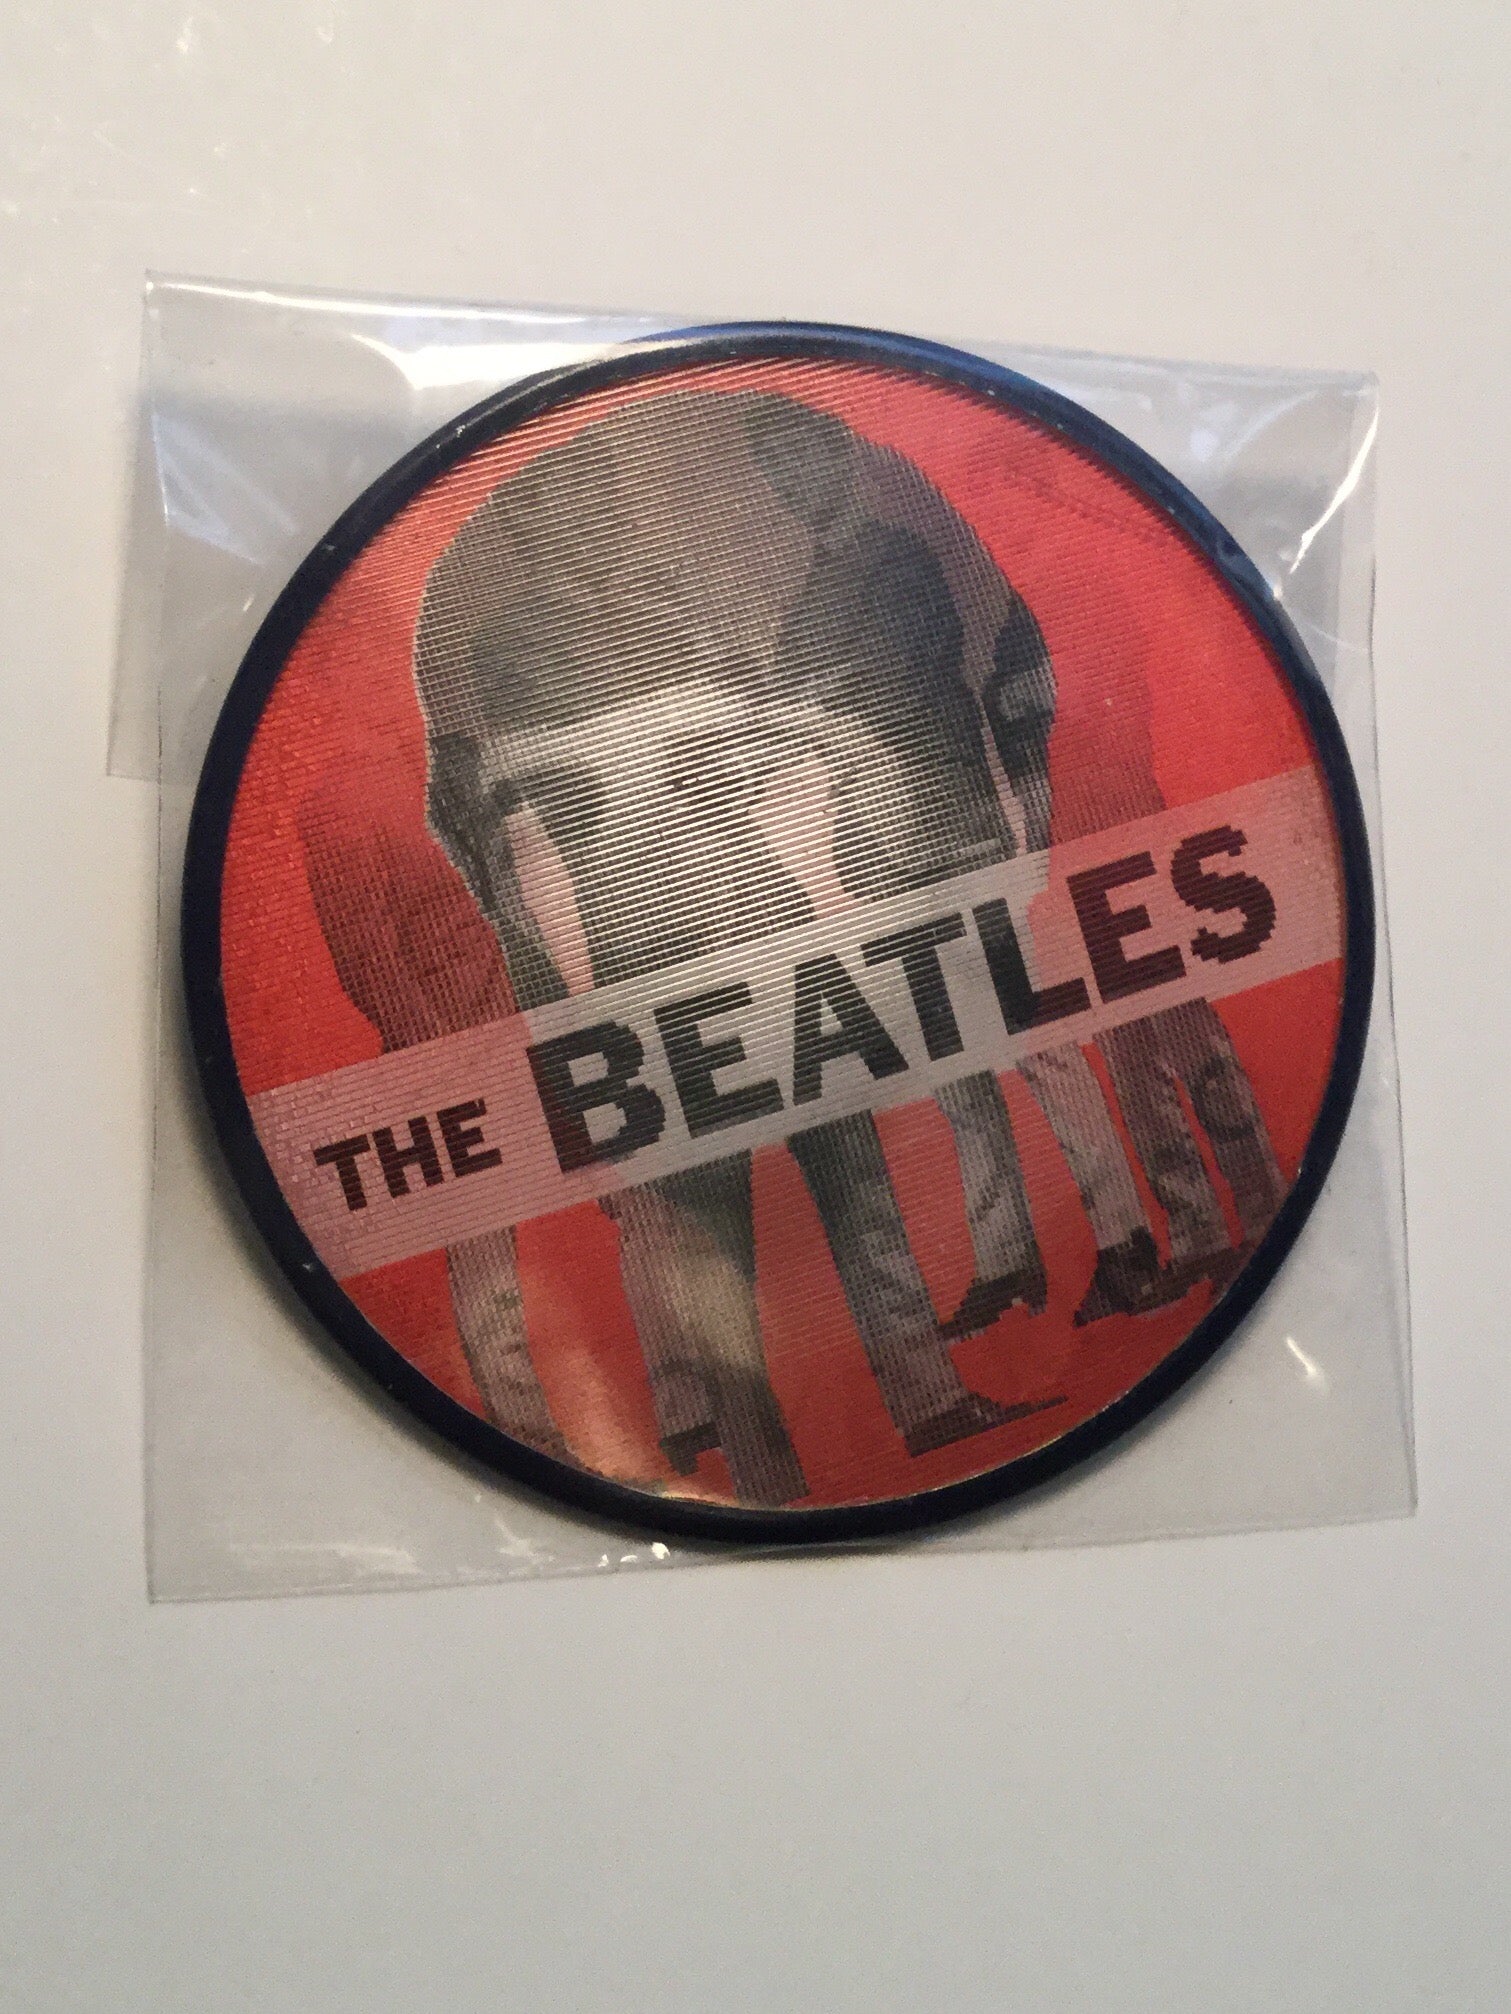 Beatles rare 3 inch red lenticular button 1960s